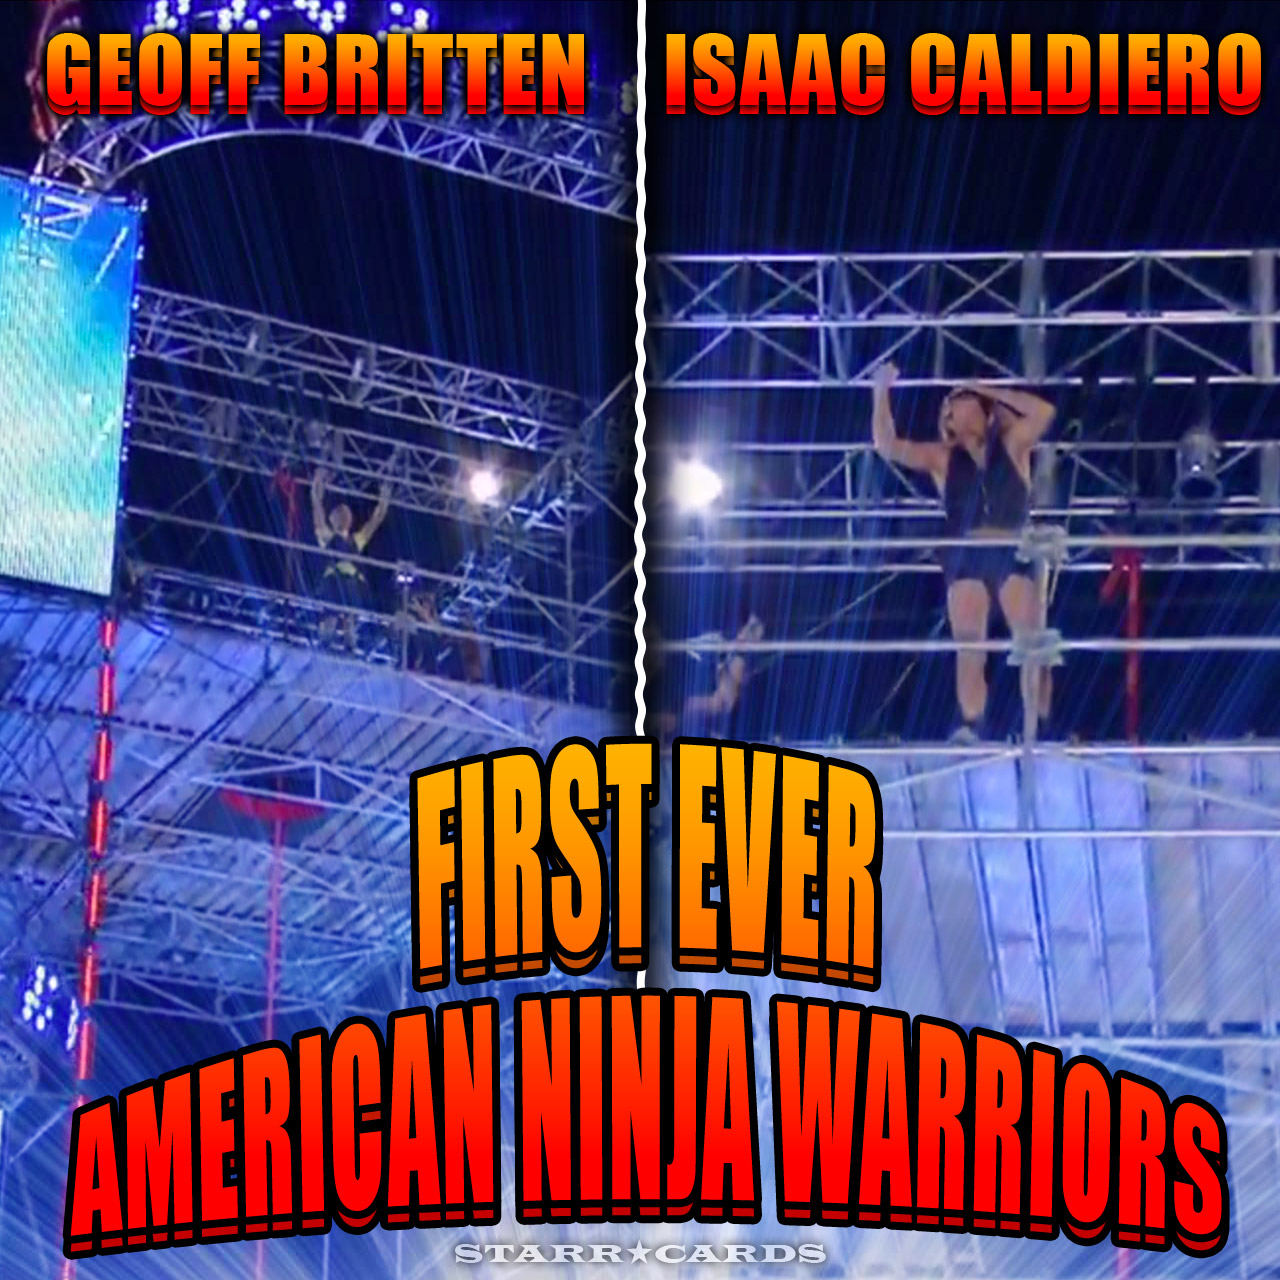 Geoff Britten and Isaac Caldiero are the first ever to complete 'American Ninja Warrior'